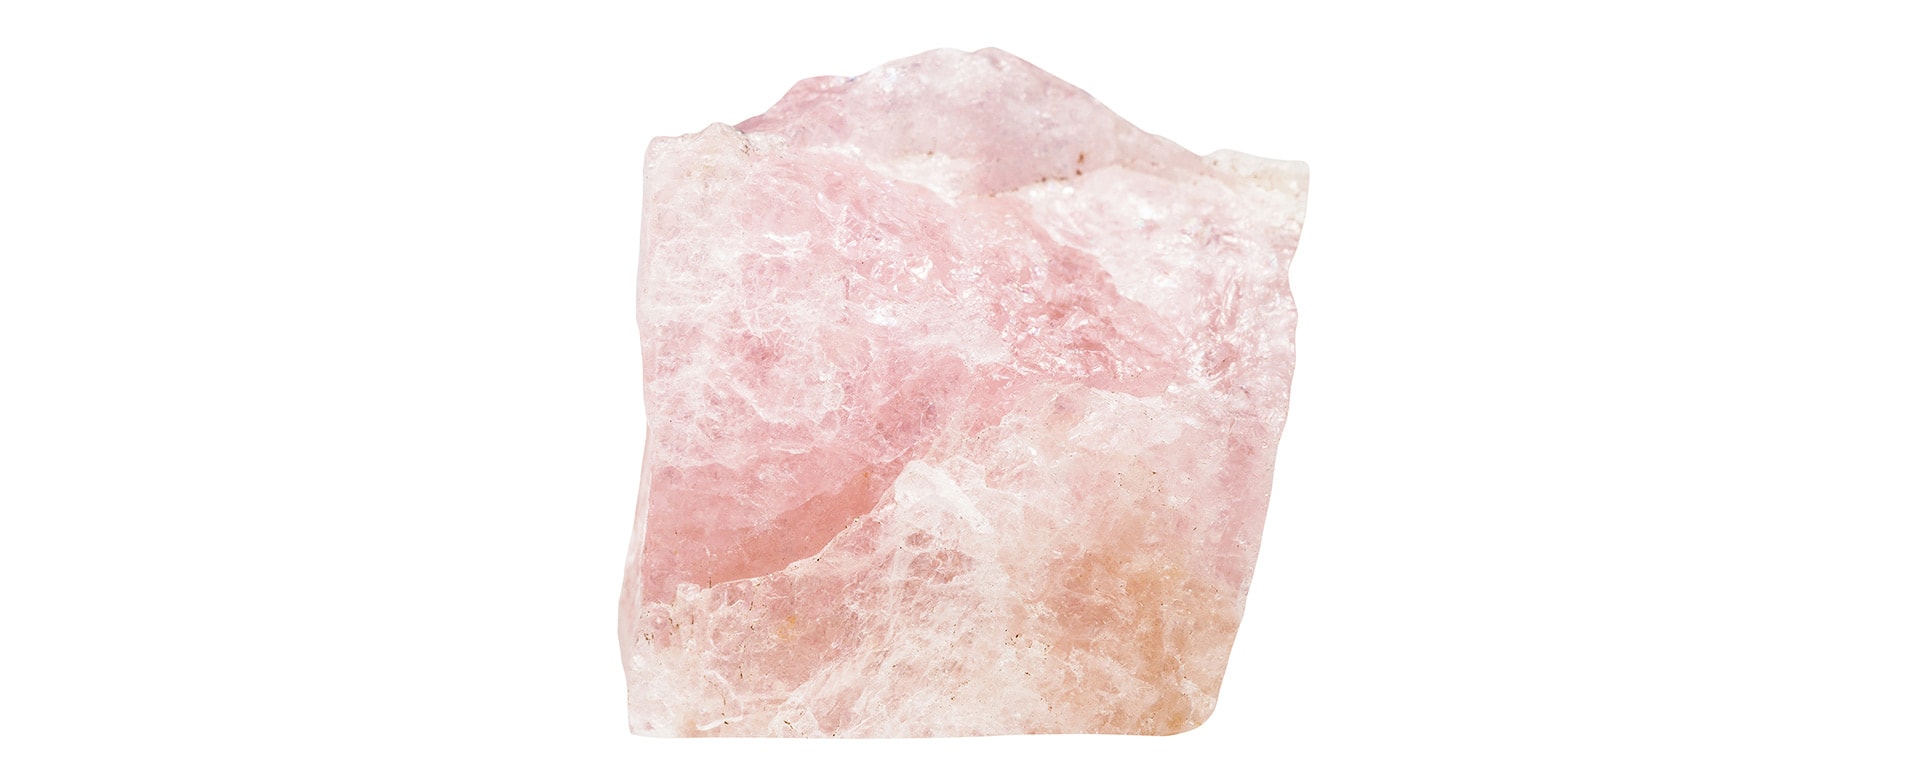 Morganite Meaning and Properties 1